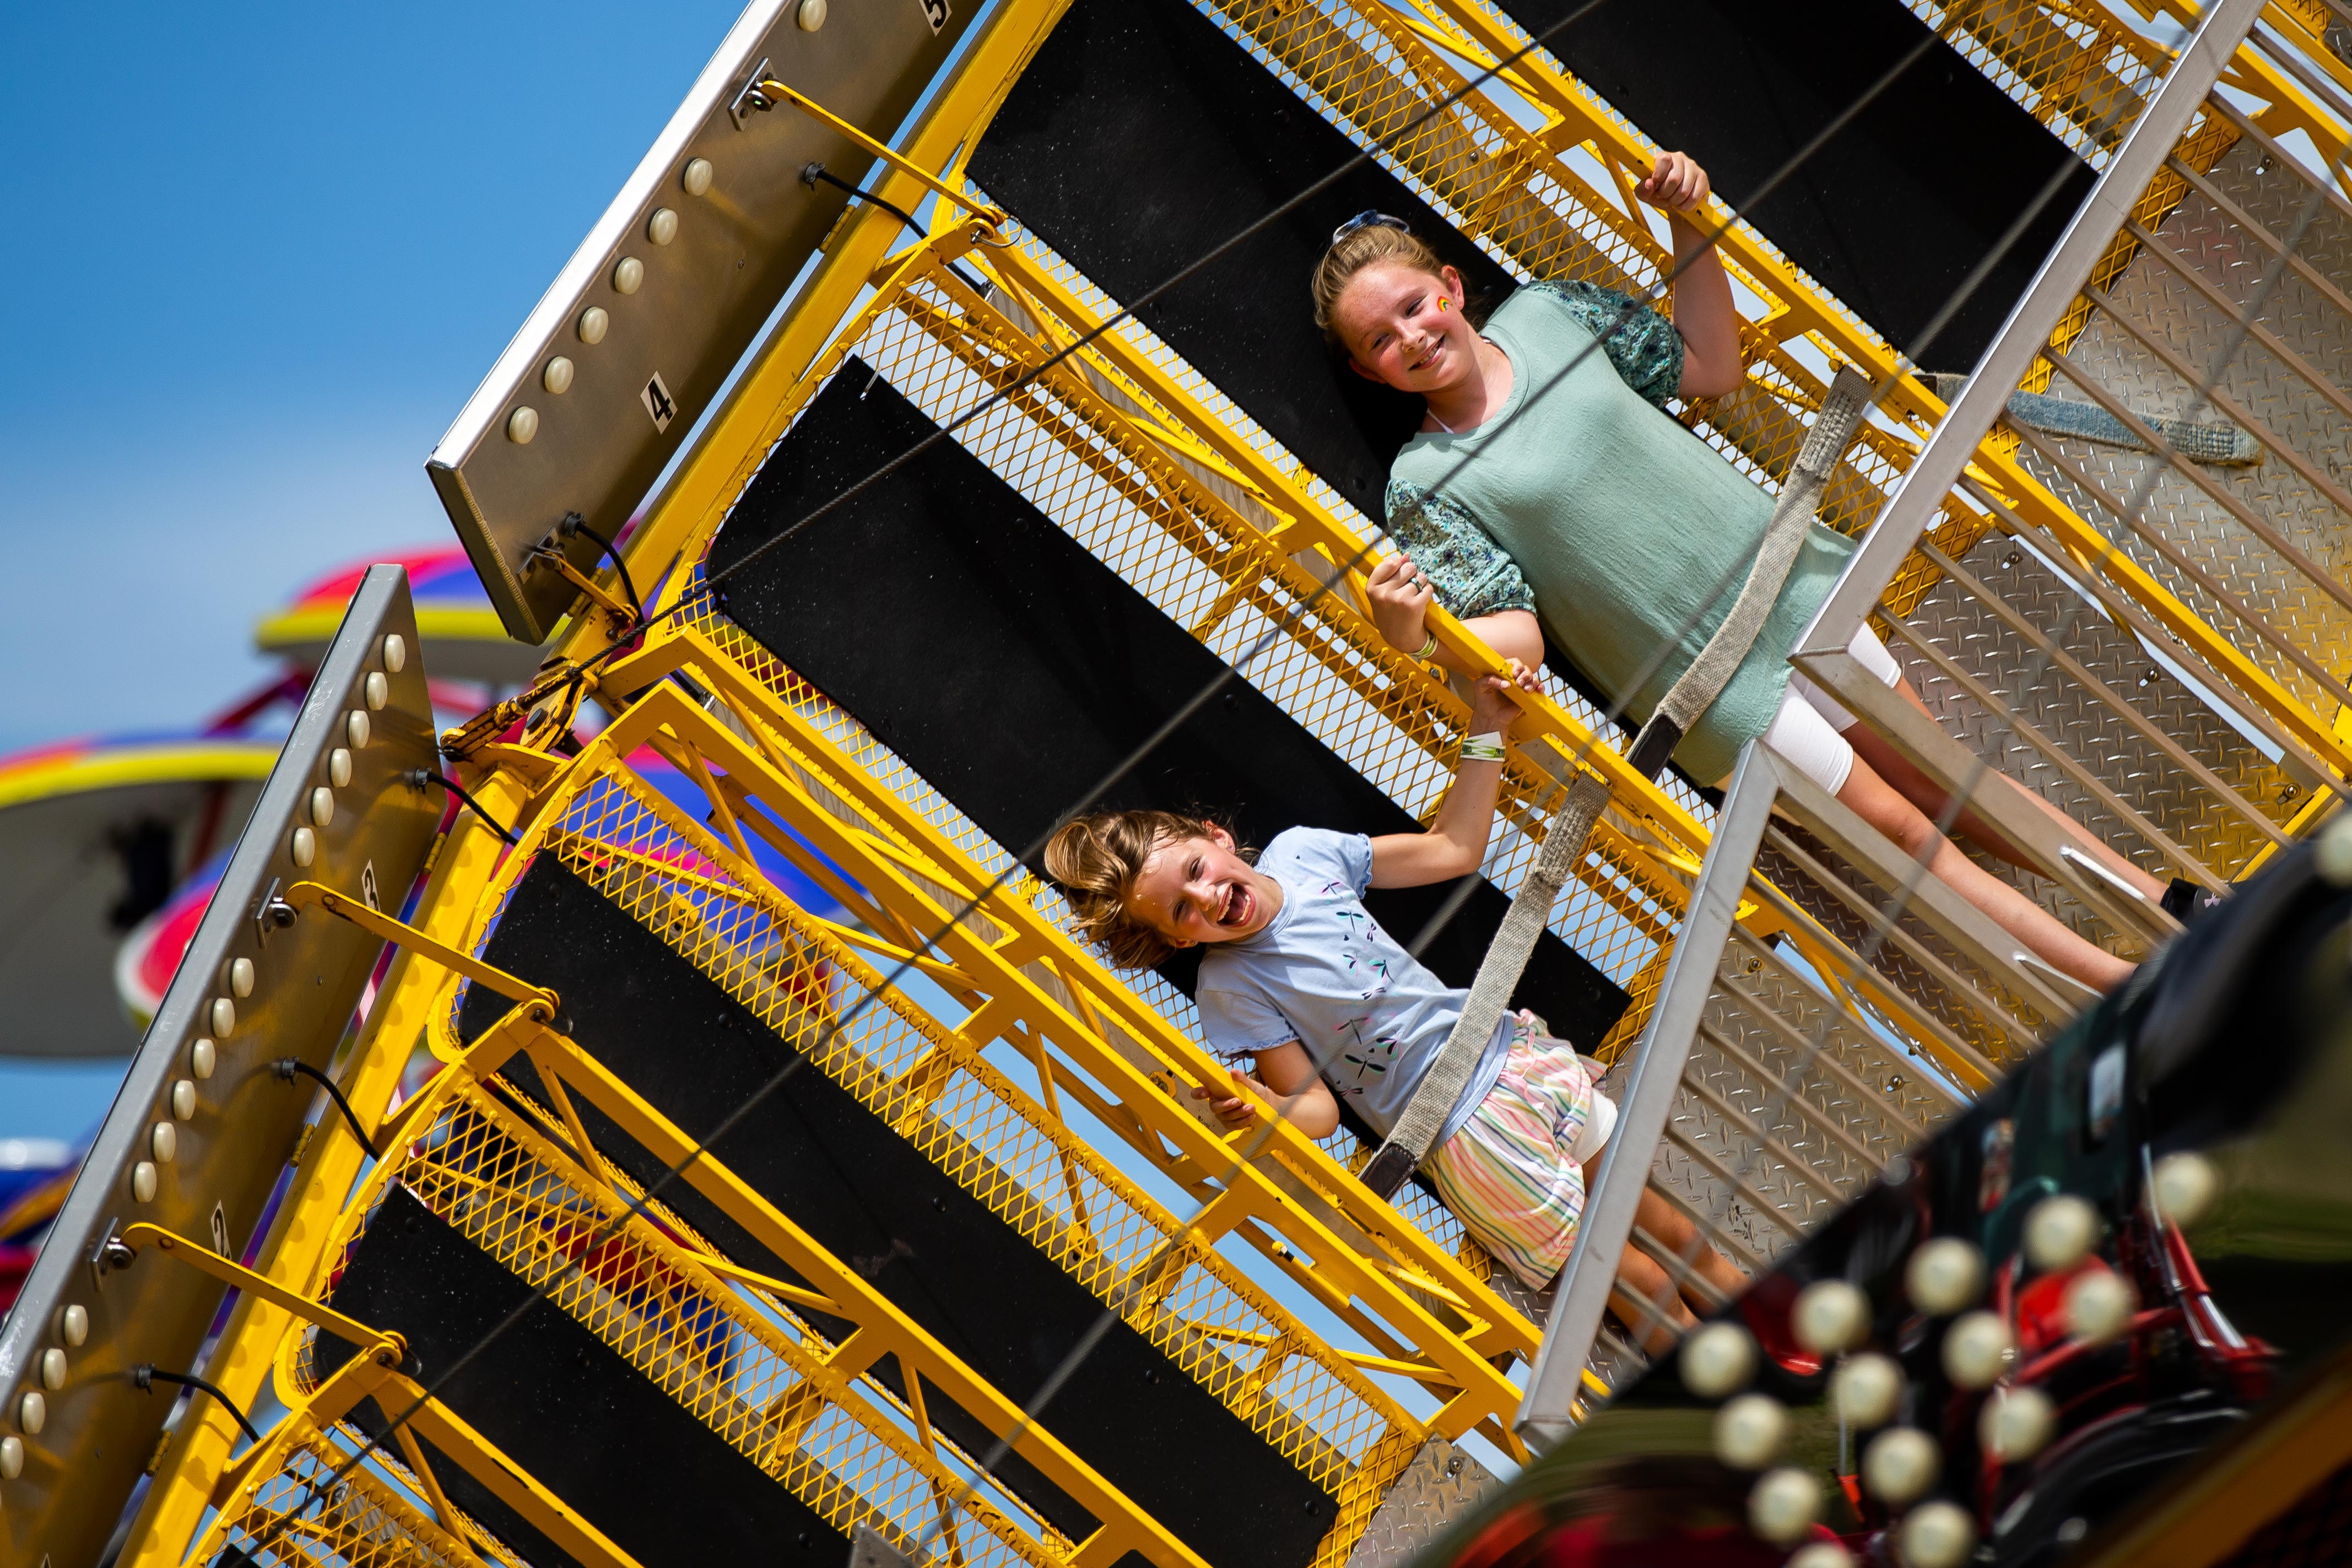 Scenes from the Ionia Free Fair as thousands gather to enjoy rides, animals, food and more Tuesday, July 19, 2022. 